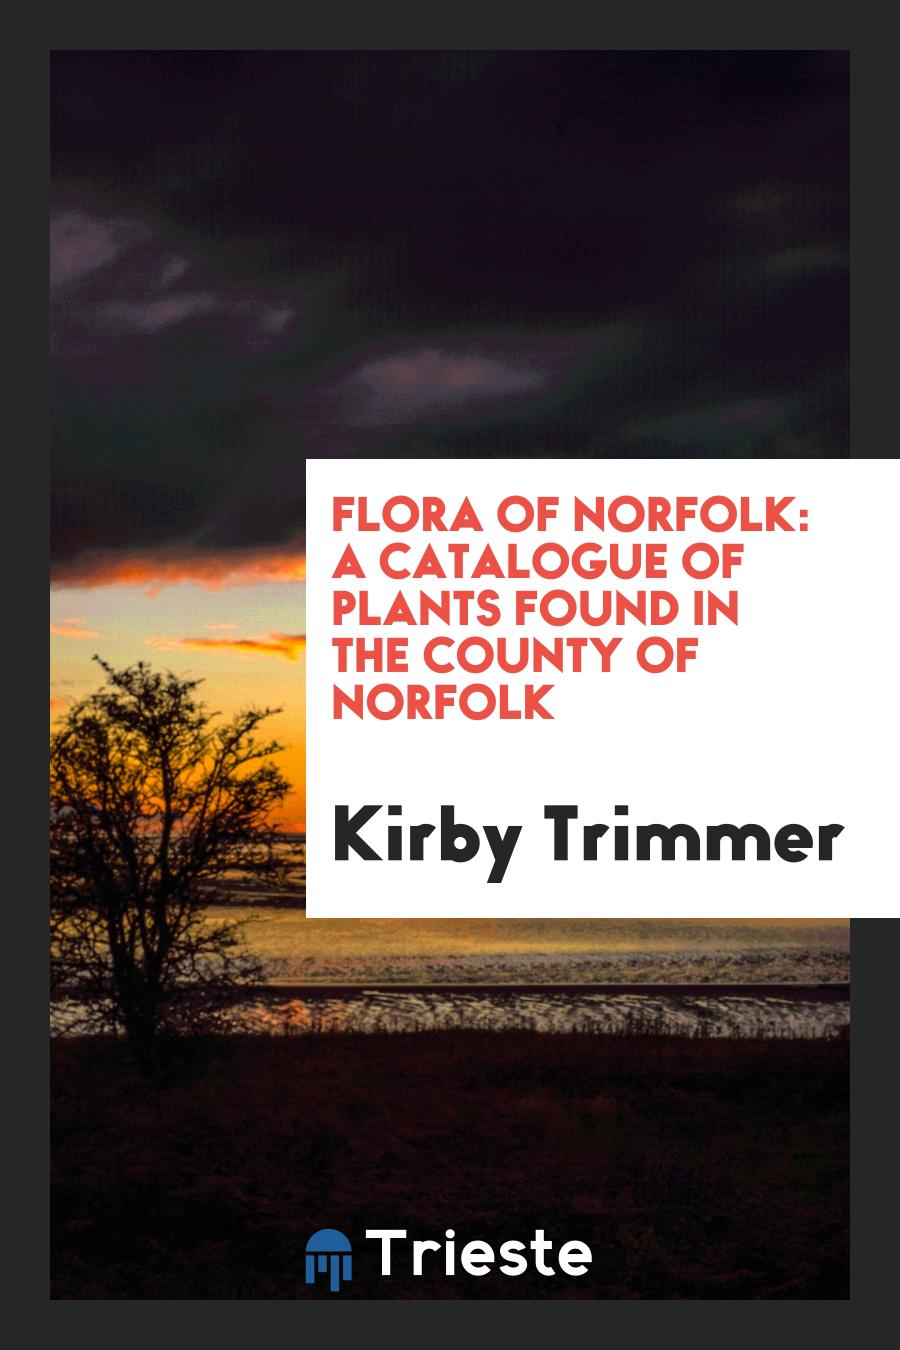 Flora of Norfolk: A Catalogue of Plants Found in the County of Norfolk